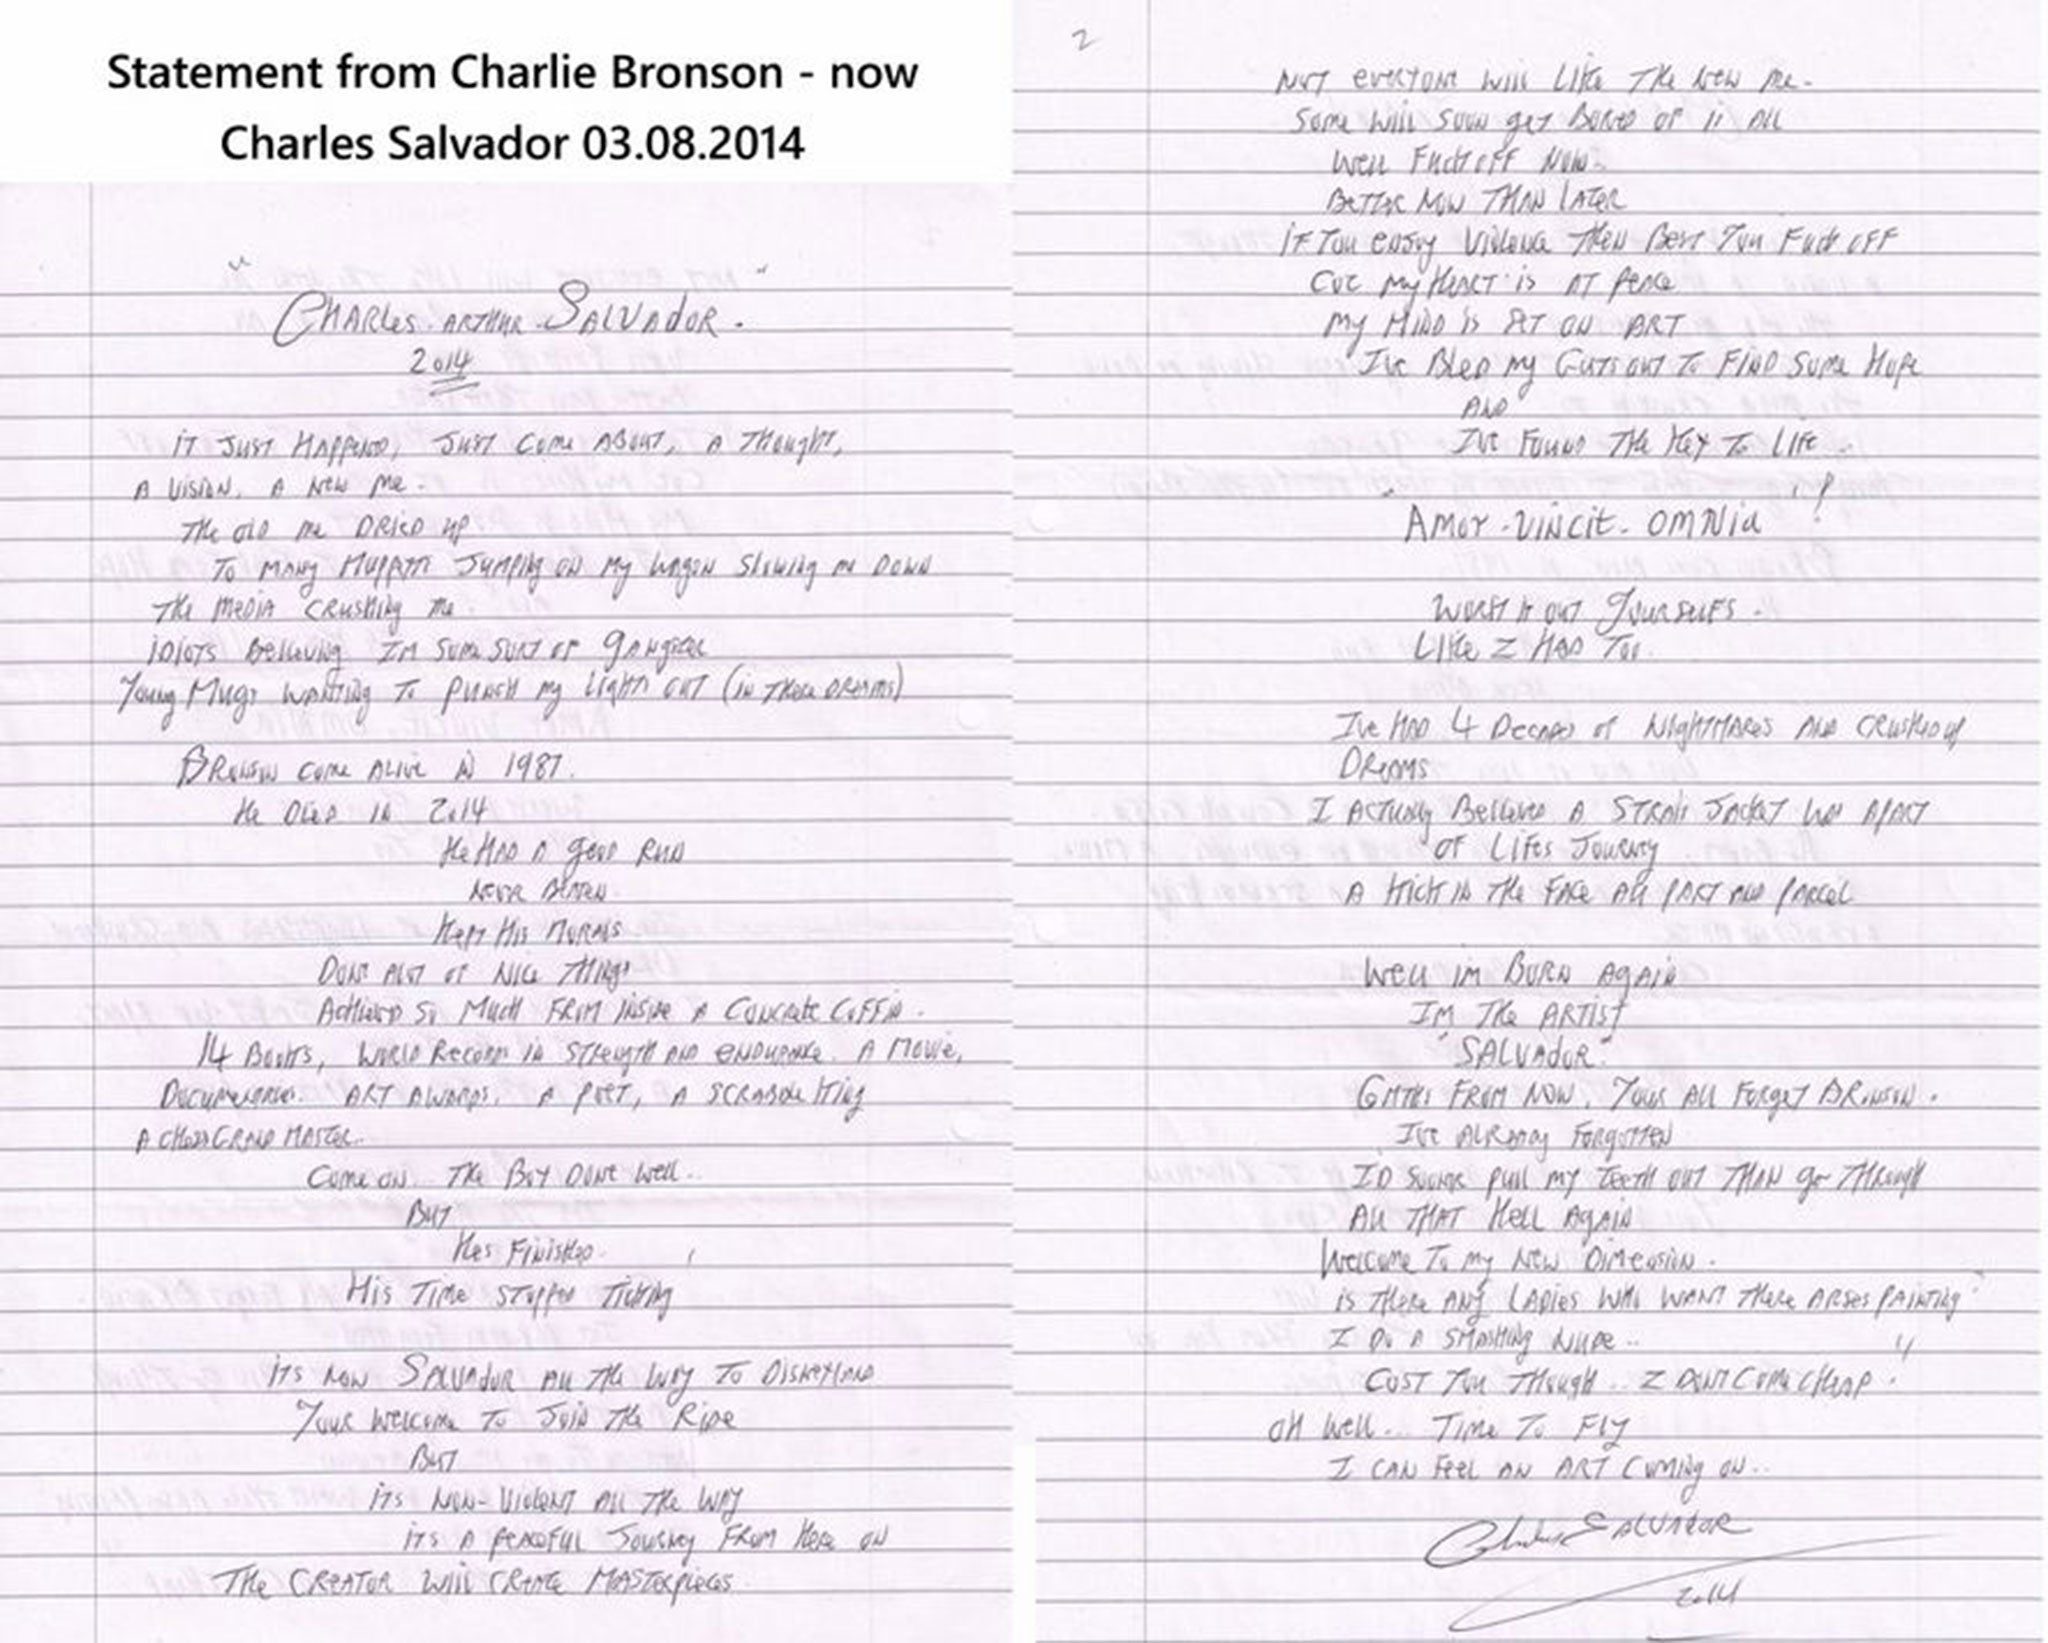 Bronson's hand-written letter announcing his name change, published on the Charlie Bronson Appeal Fund website